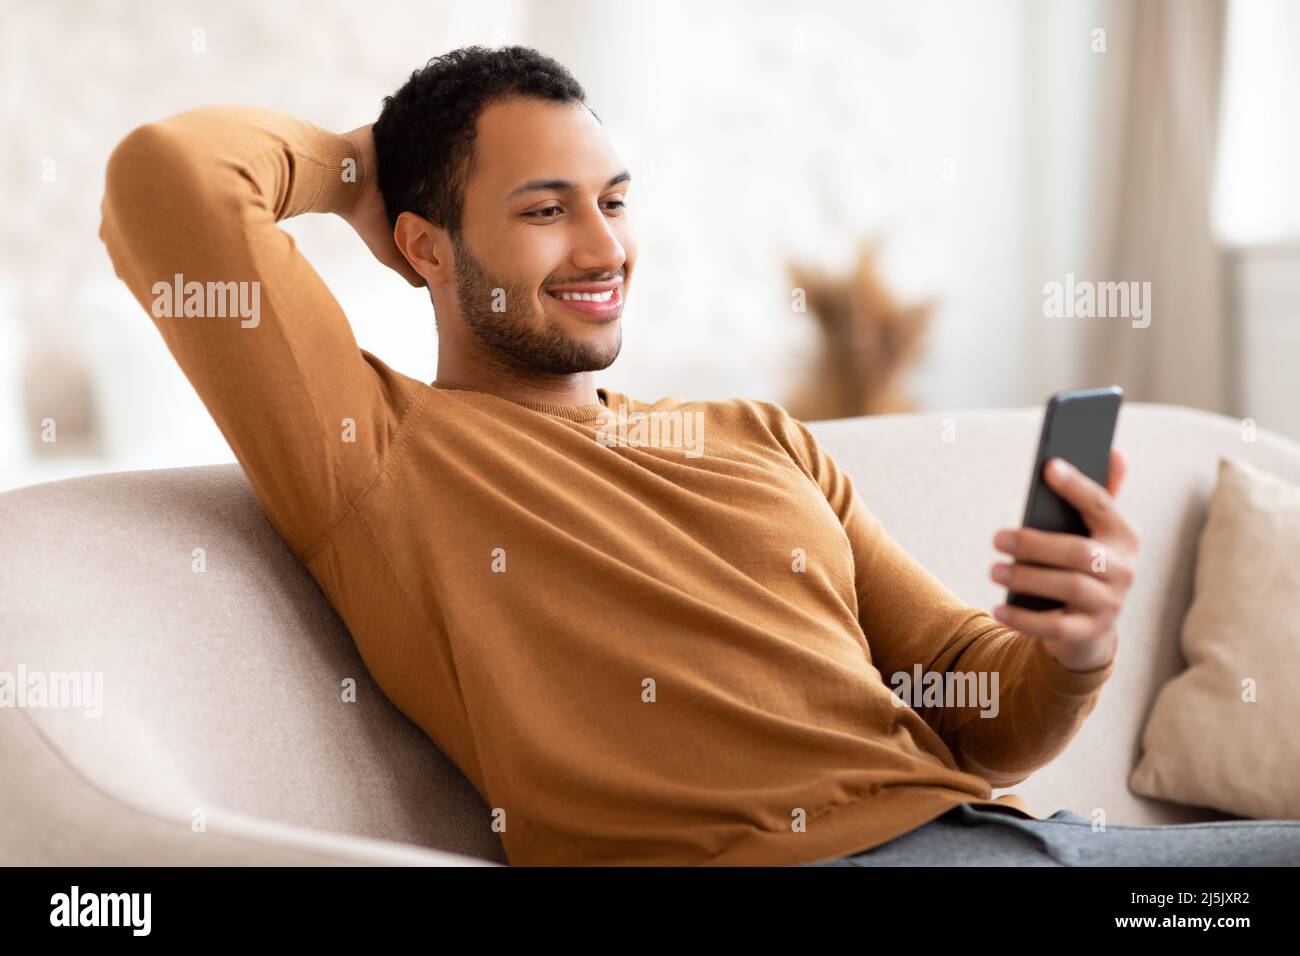 Portrait of smiling Arab man using smartphone at home Stock Photo